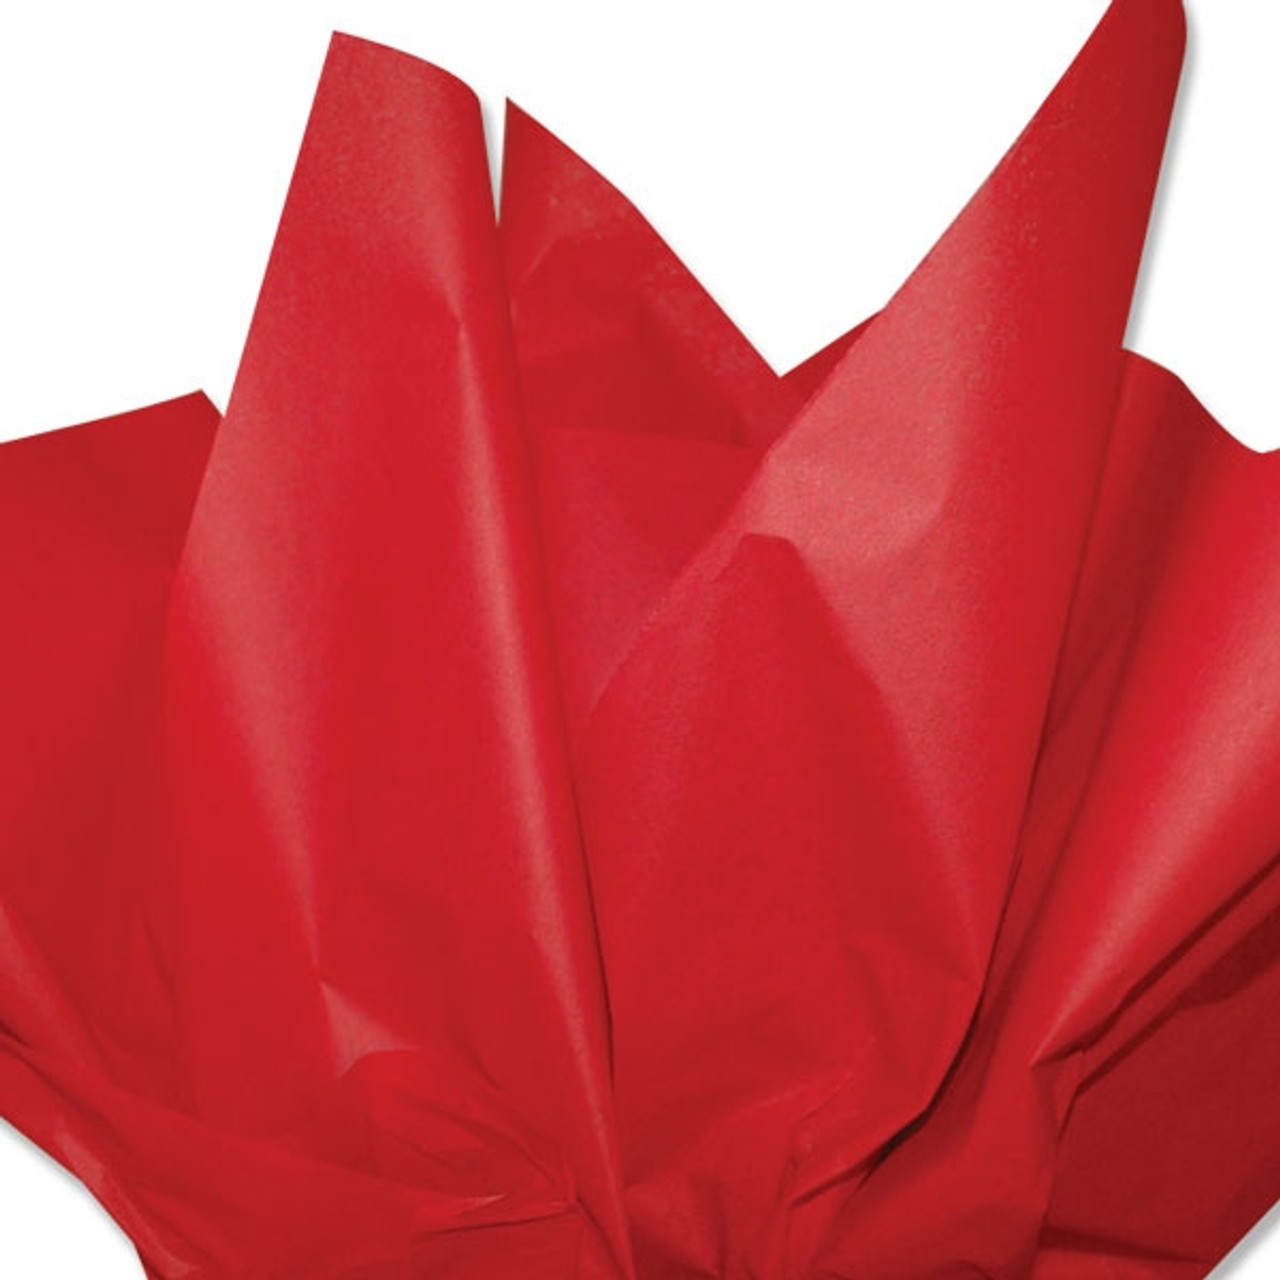 Red Tissue Paper - 20 x 30 Sheets - 480 / Pack - 100% Recycled